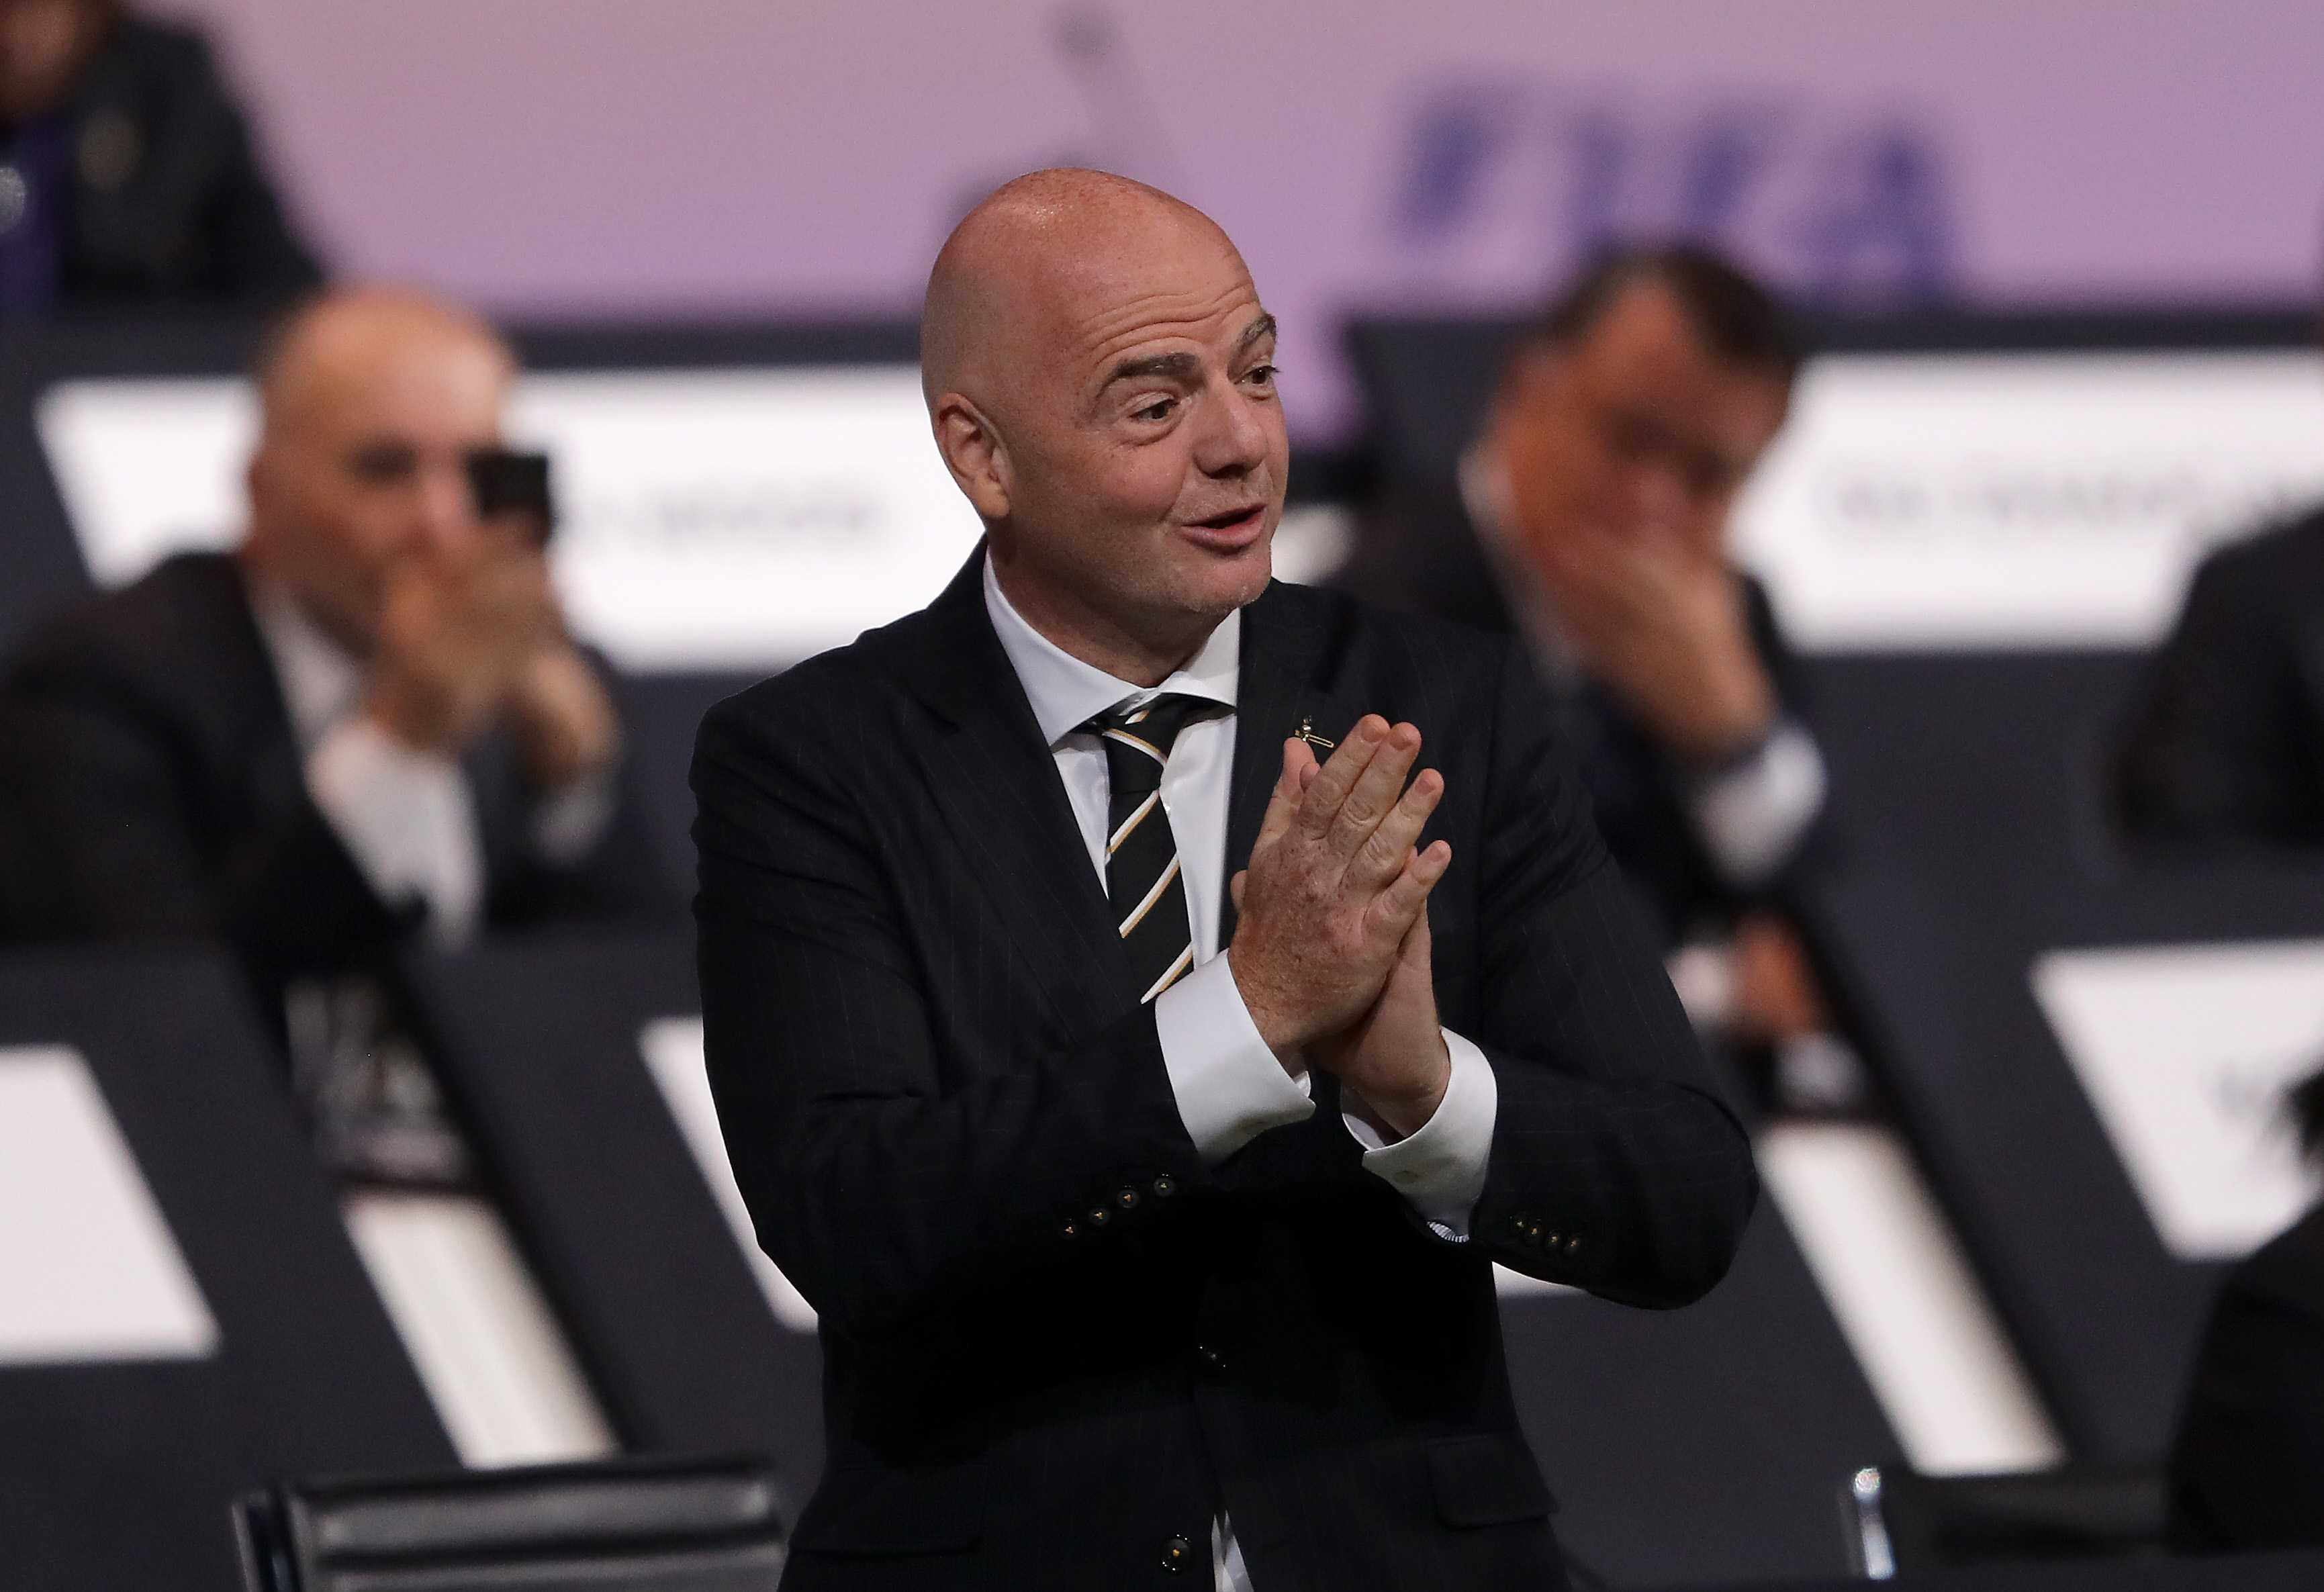 Infantino hails Women's World Cup as high-powered vehicle for change